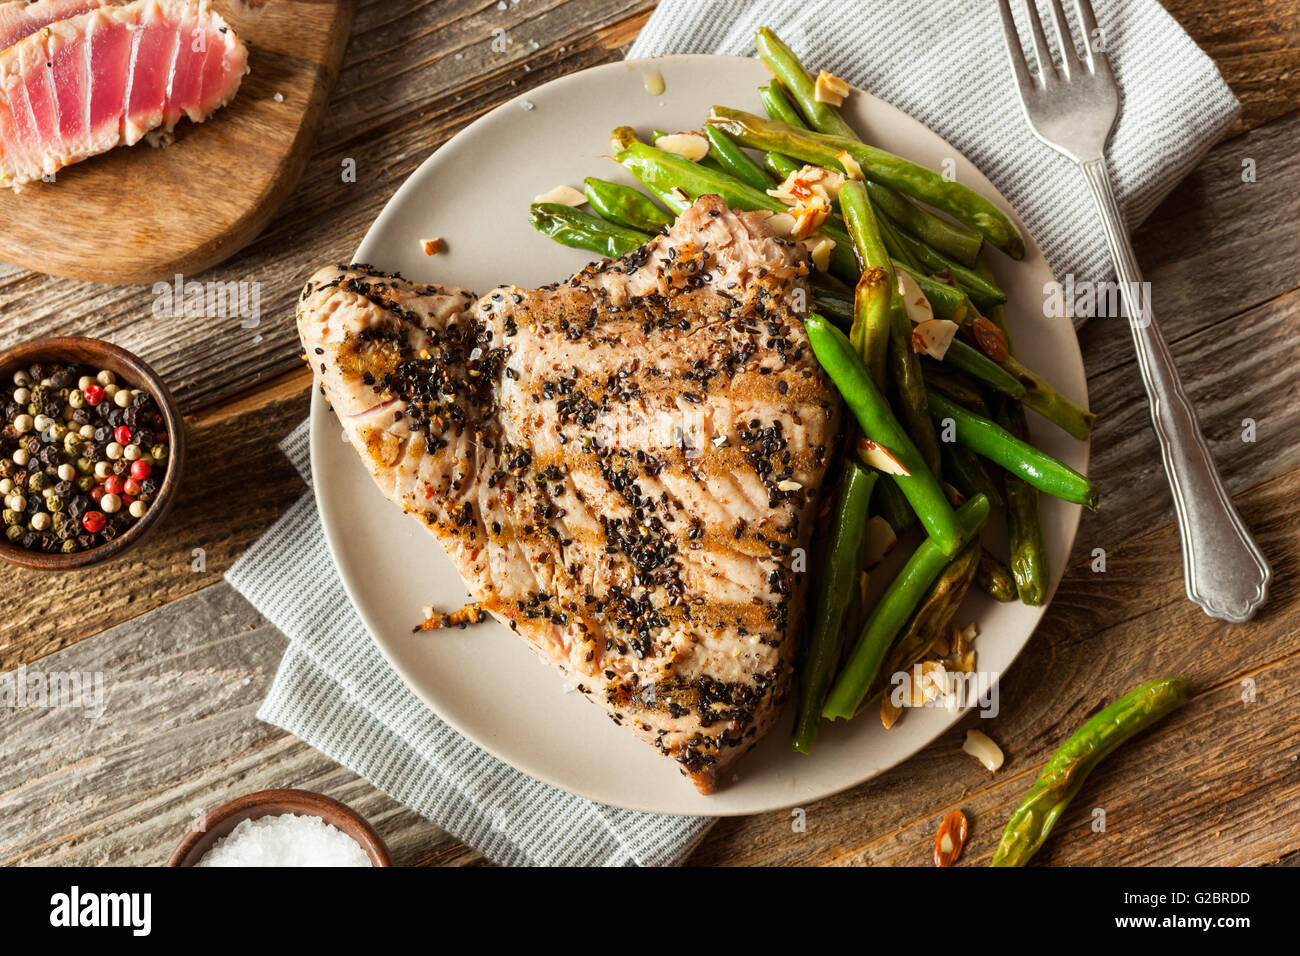 Homemade Grilled Sesame Tuna Steak with Soy Sauce Stock Photo